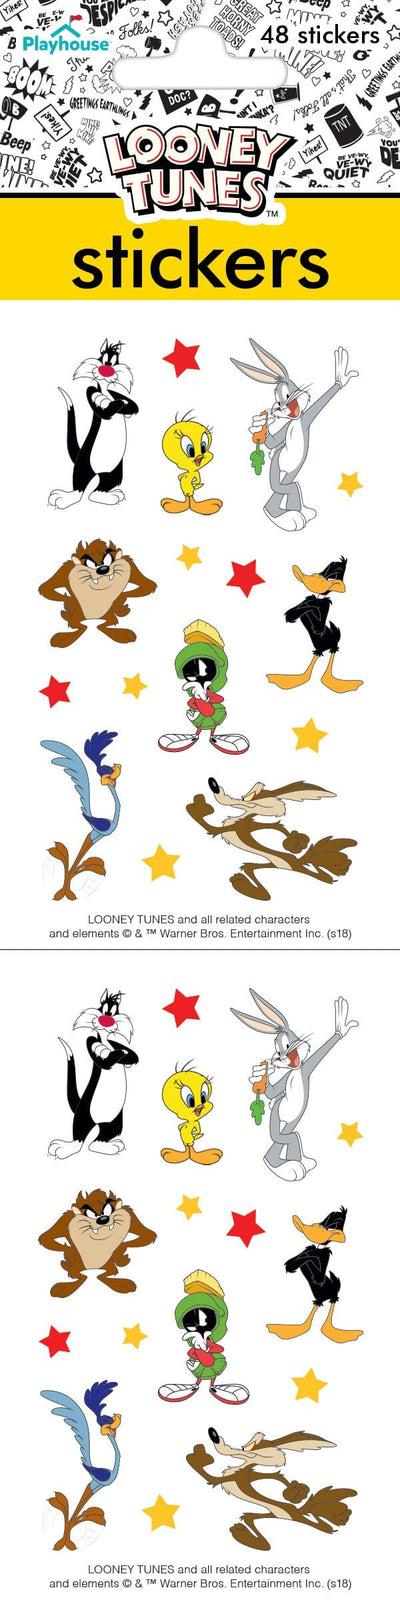 stickers featuring looney tunes characters, shown in package.